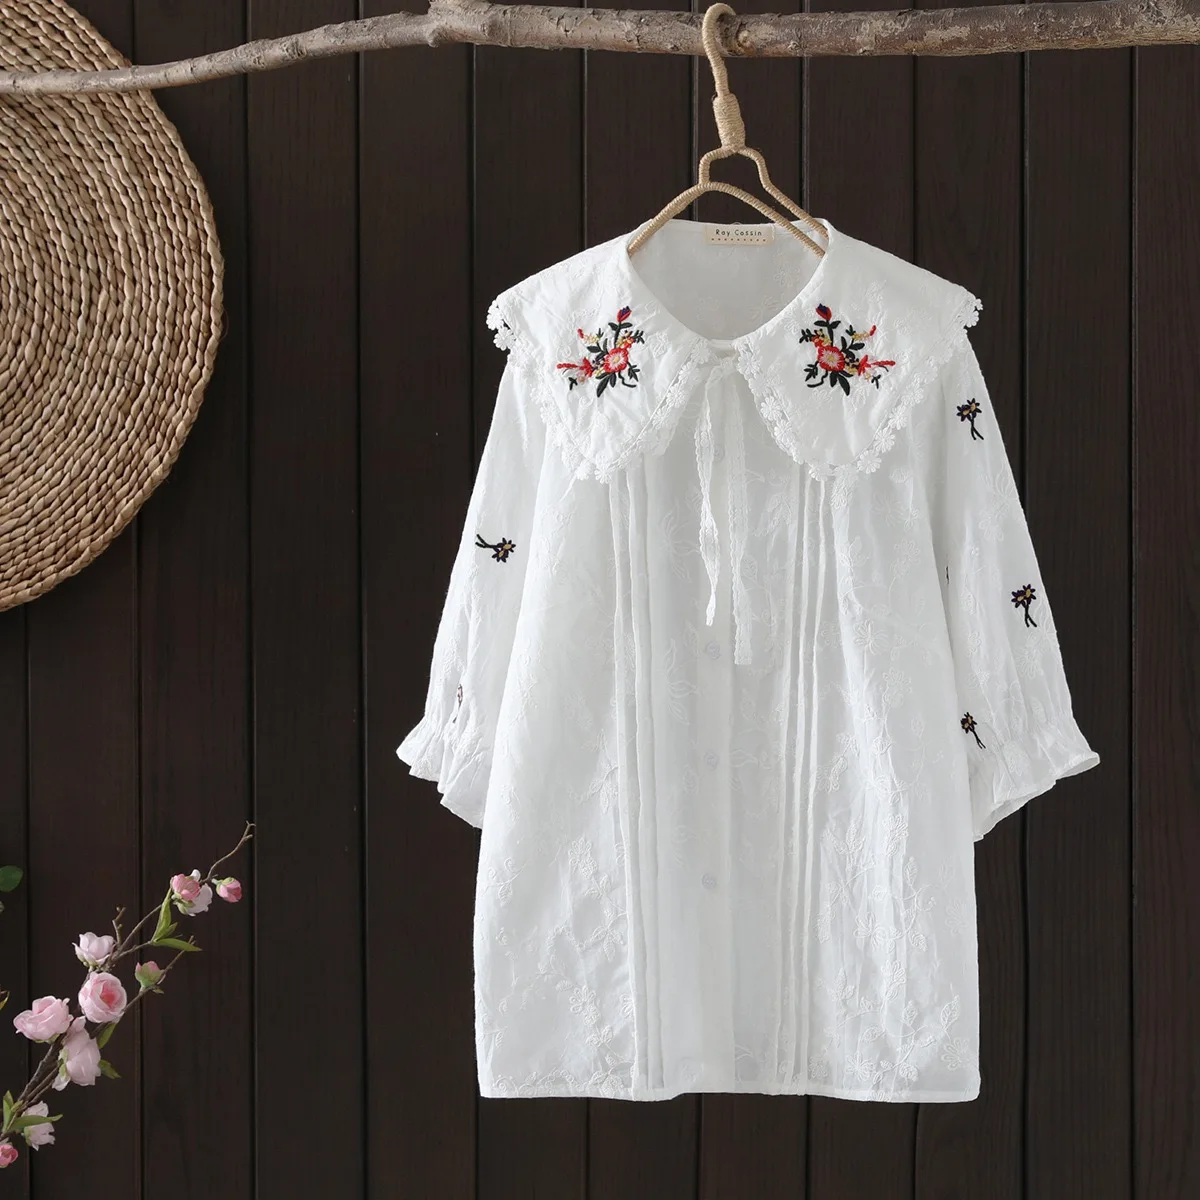 

Sweet 100% cotton shirts and blouses women tops mori girls Japanese style peter pan collar white floral embroidered shirt lolita